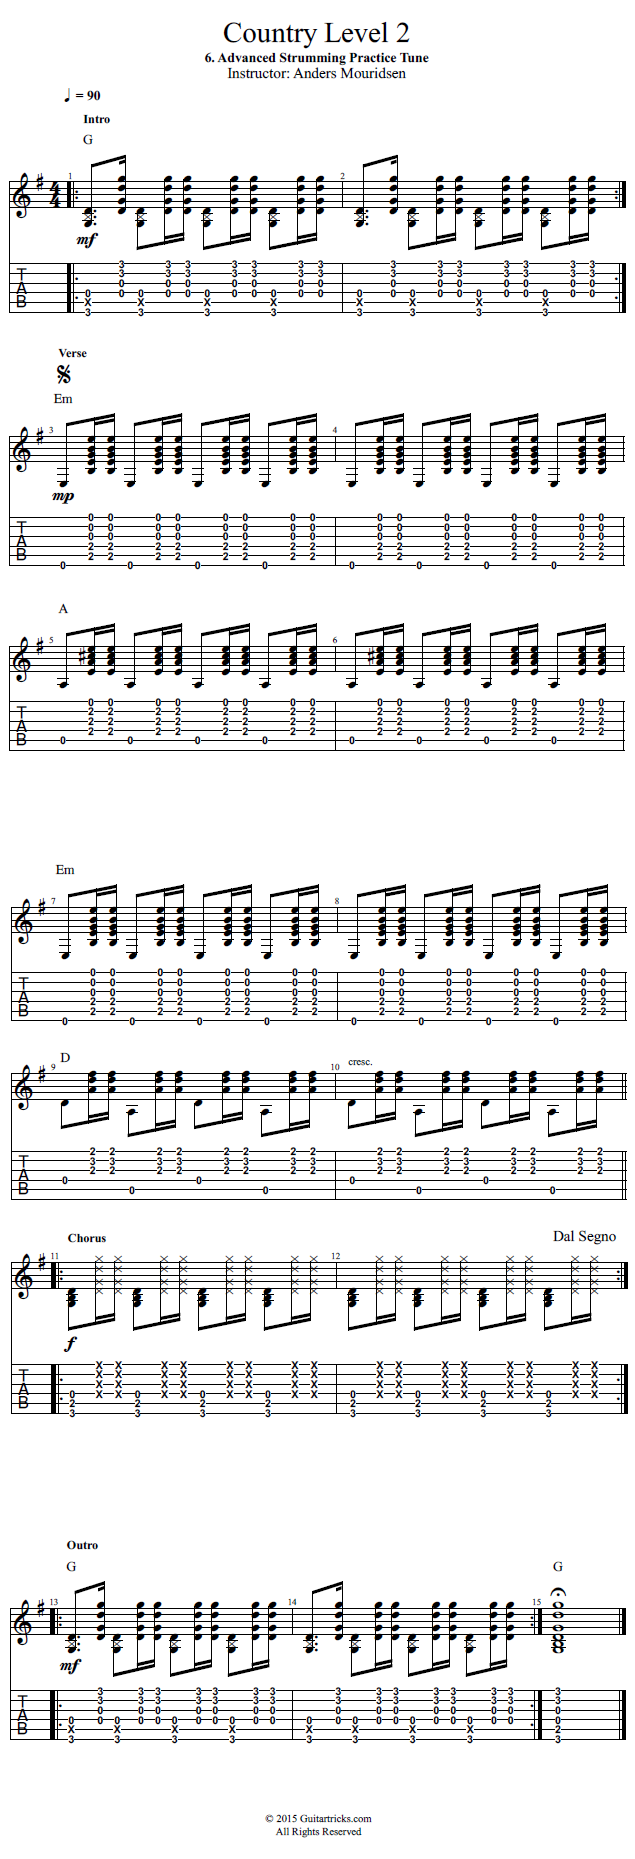 Advanced Strumming Practice Tune song notation